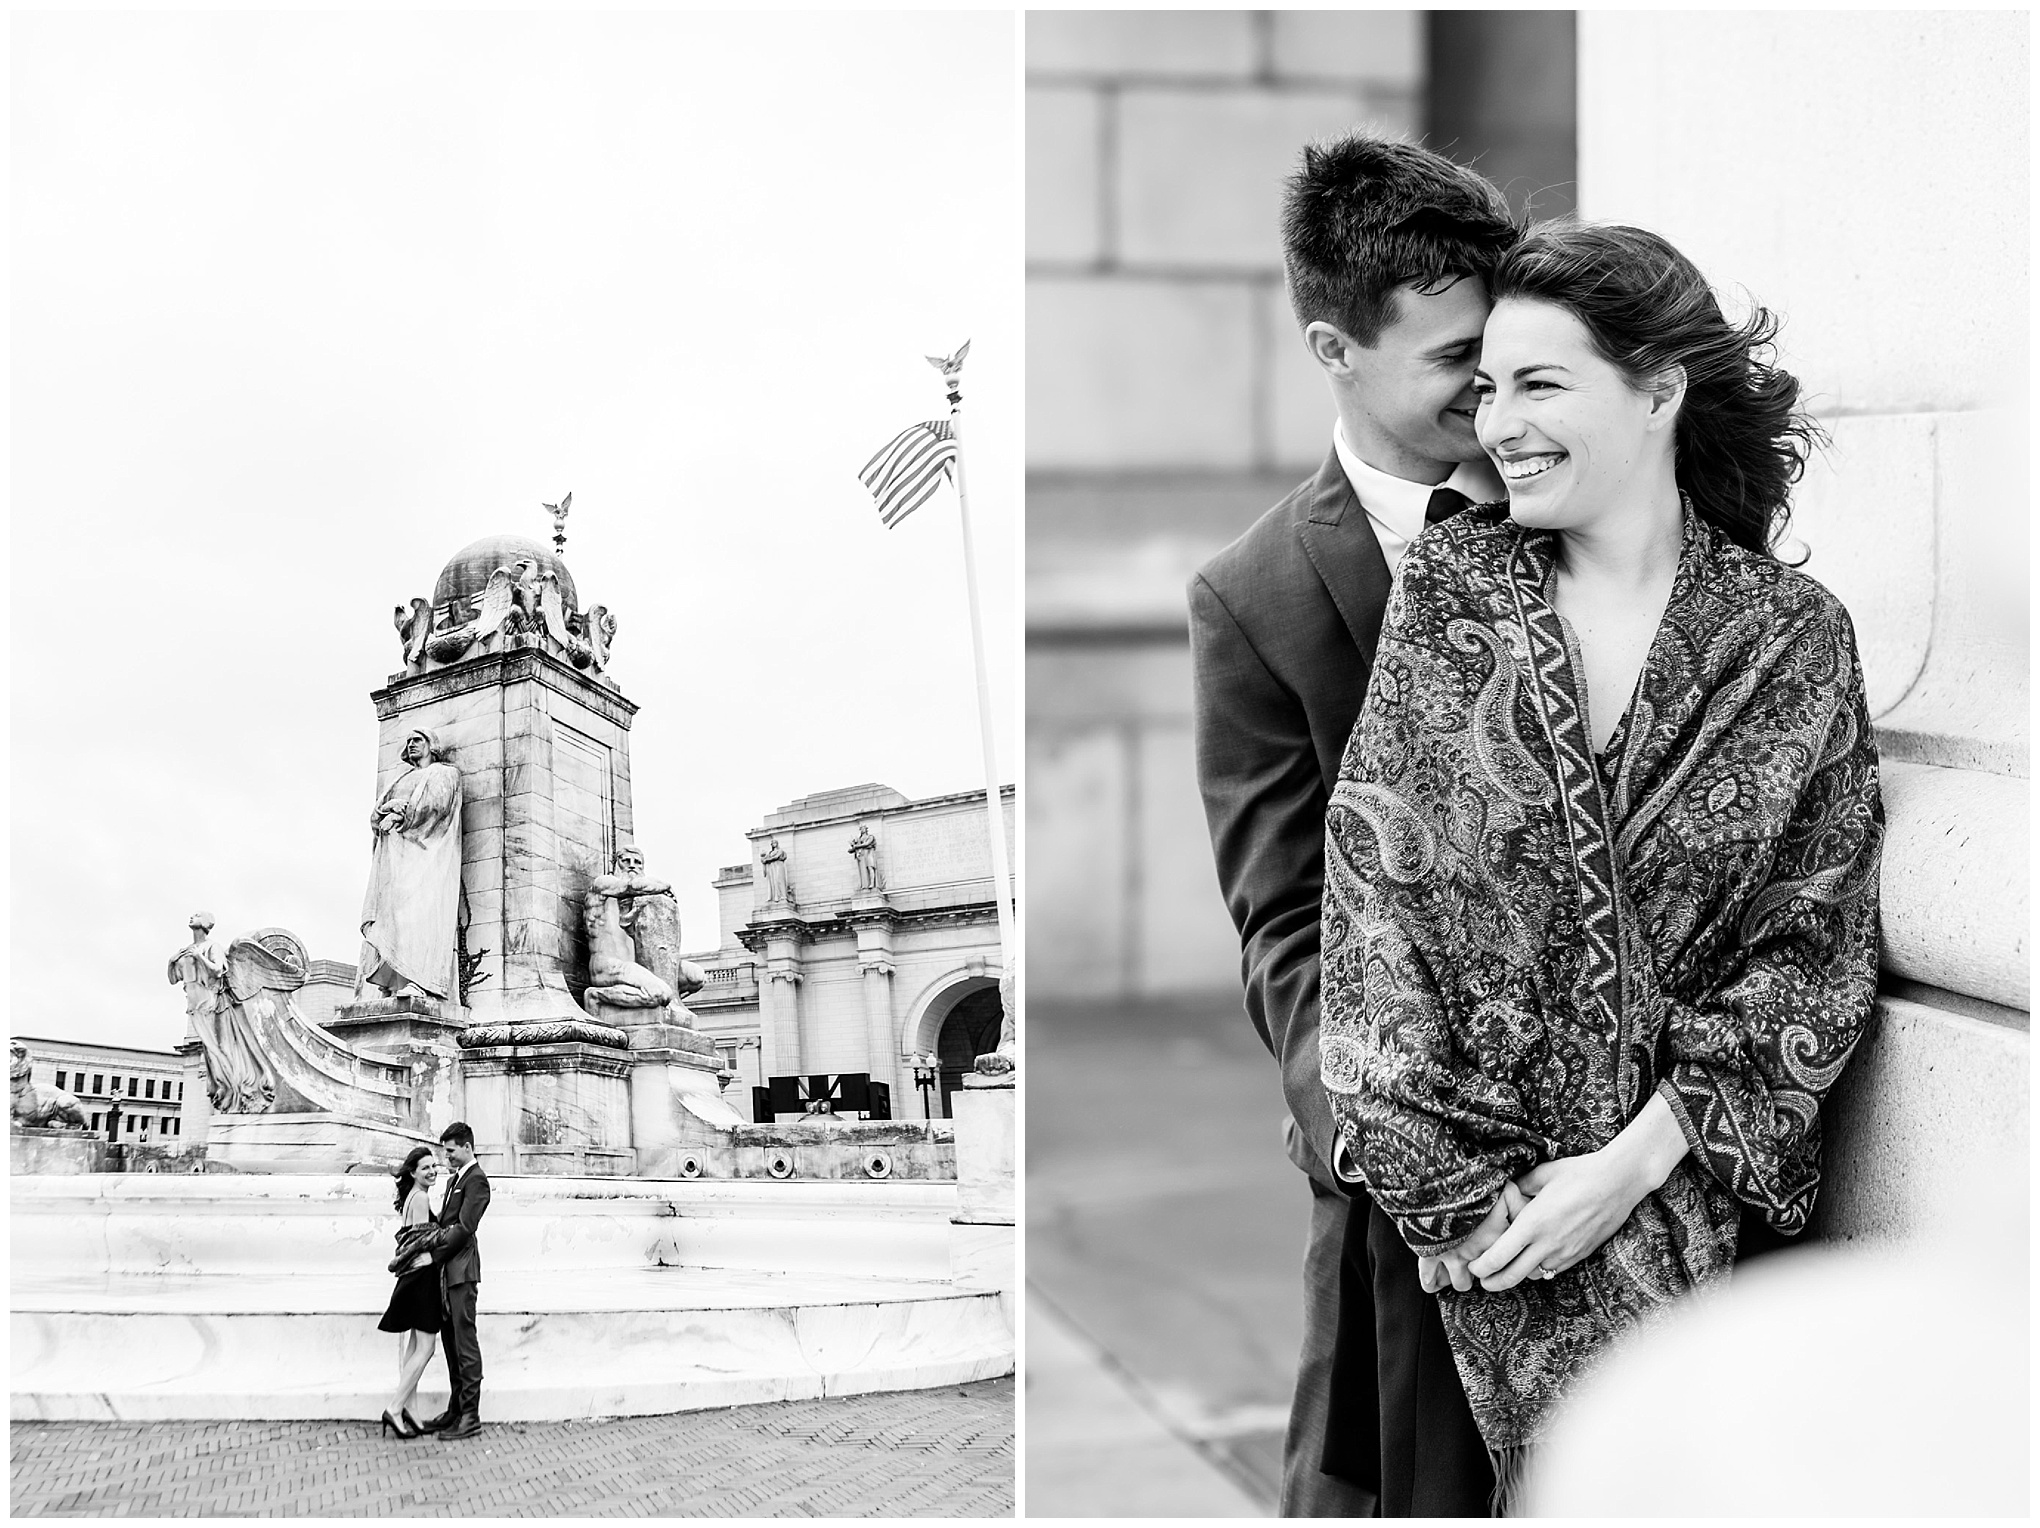 black and white engagement photos, black and white photography, black and white photos, engagement photos, black and white D.C., D.C. engagement photos, classic engagement photos, traditional engagement photos, engagement photos poses, classic architecture, D.C. architecture, Union Station D.C., Union Station, engaged couple, relationship goals, joyful couple, black and white sessions, fountain, smiling woman